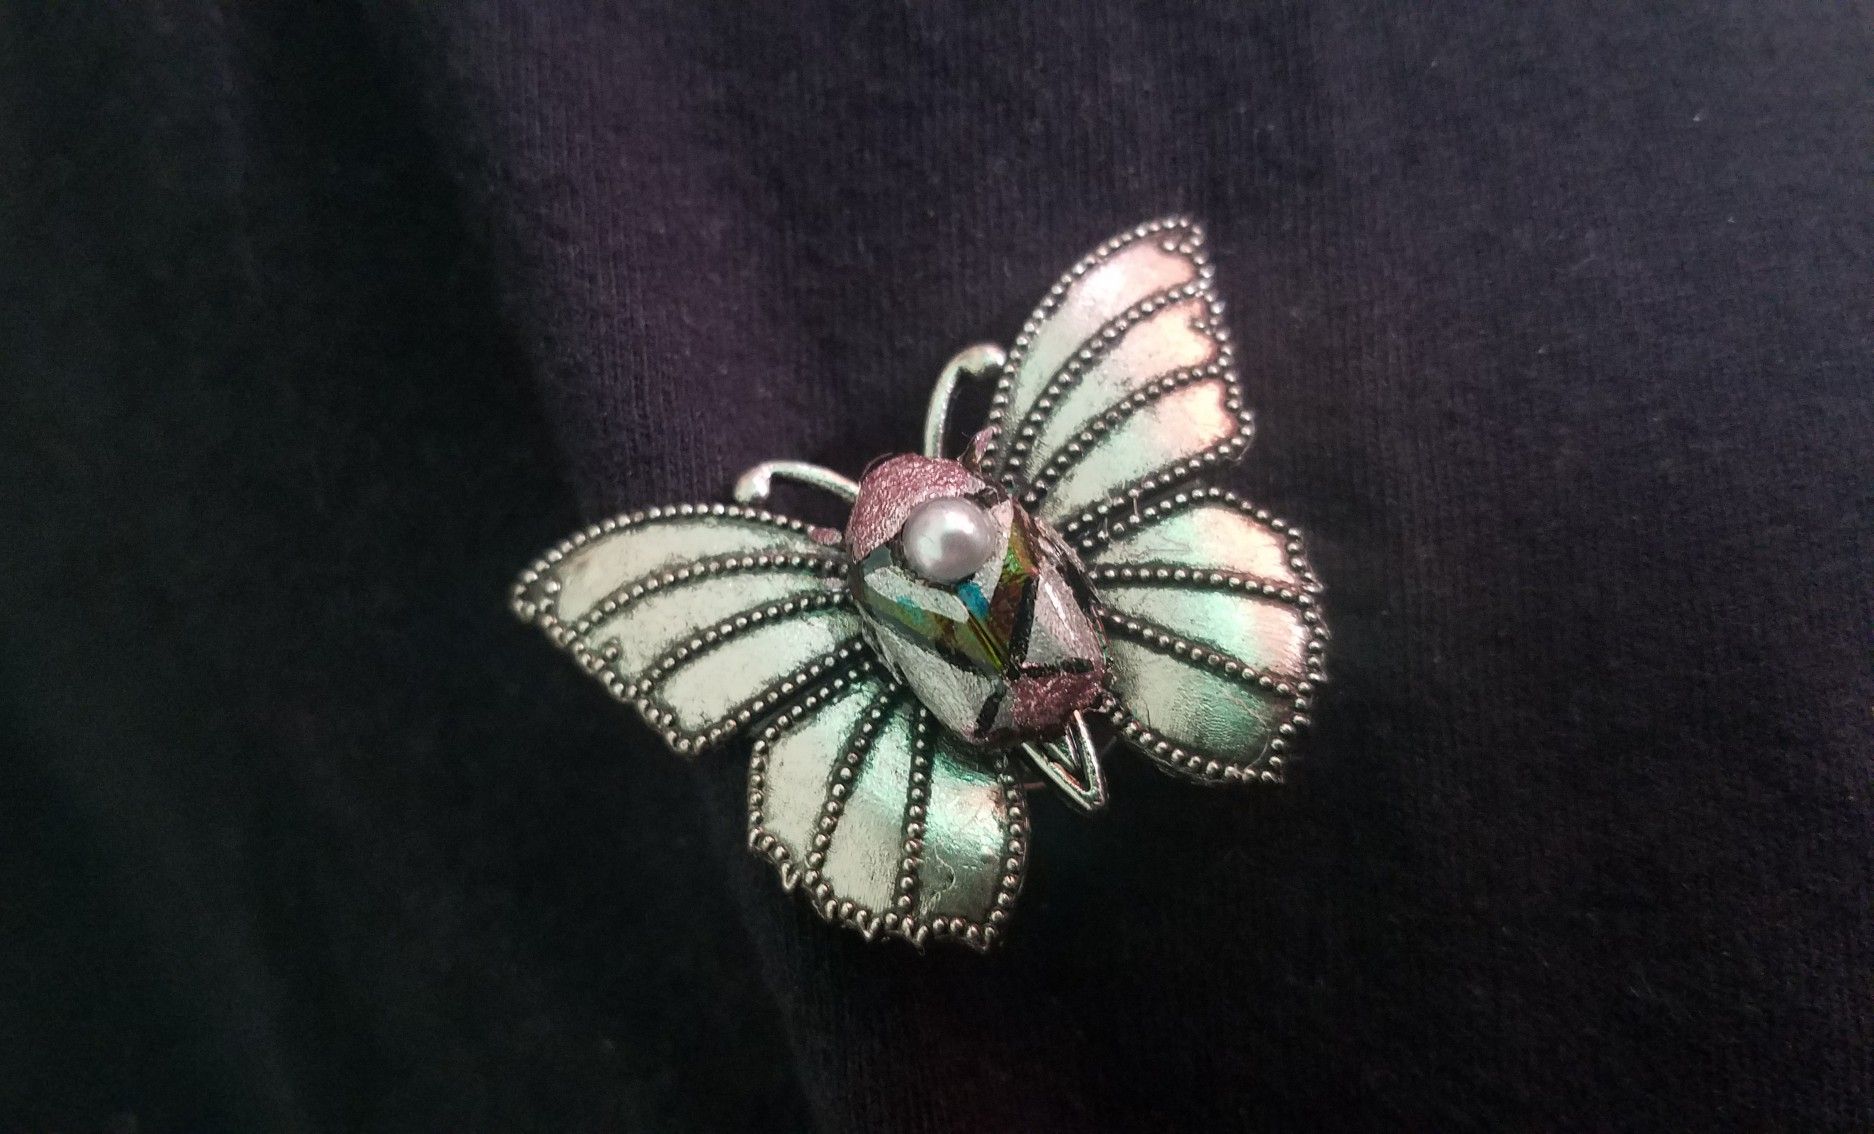 realbeetlebutterflybroochpin1, art by Sherrie Thai of Shaireproductions.com